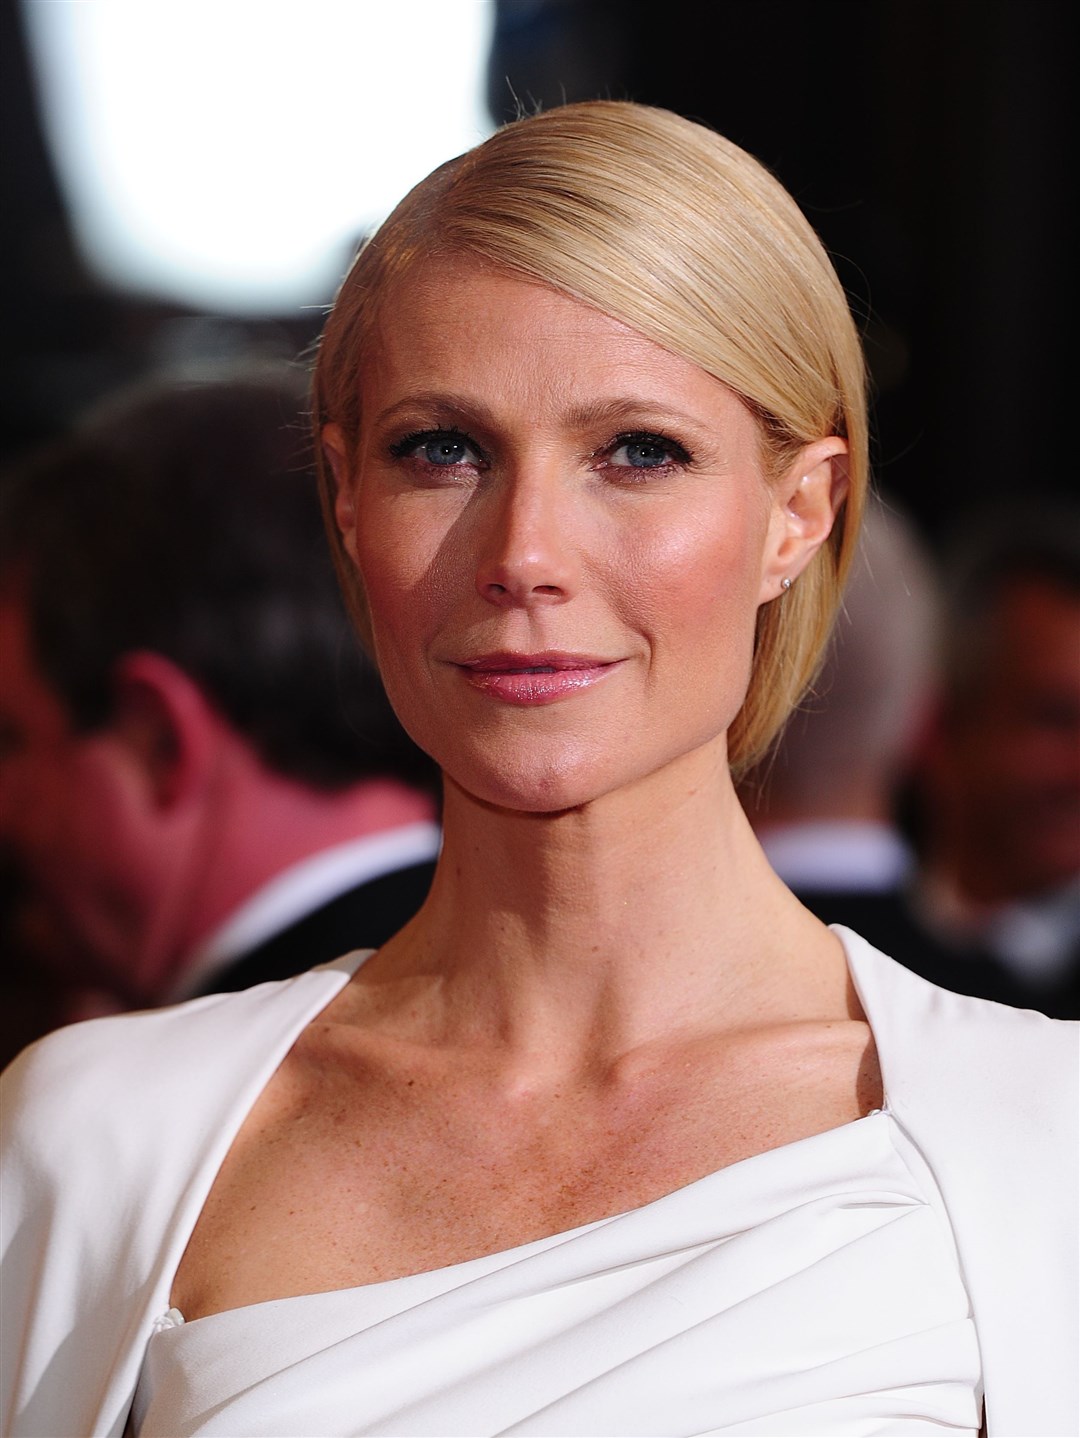 Gwyneth Paltrow arriving for the 84th Academy Awards at the Kodak Theatre, Los Angeles in 2012.